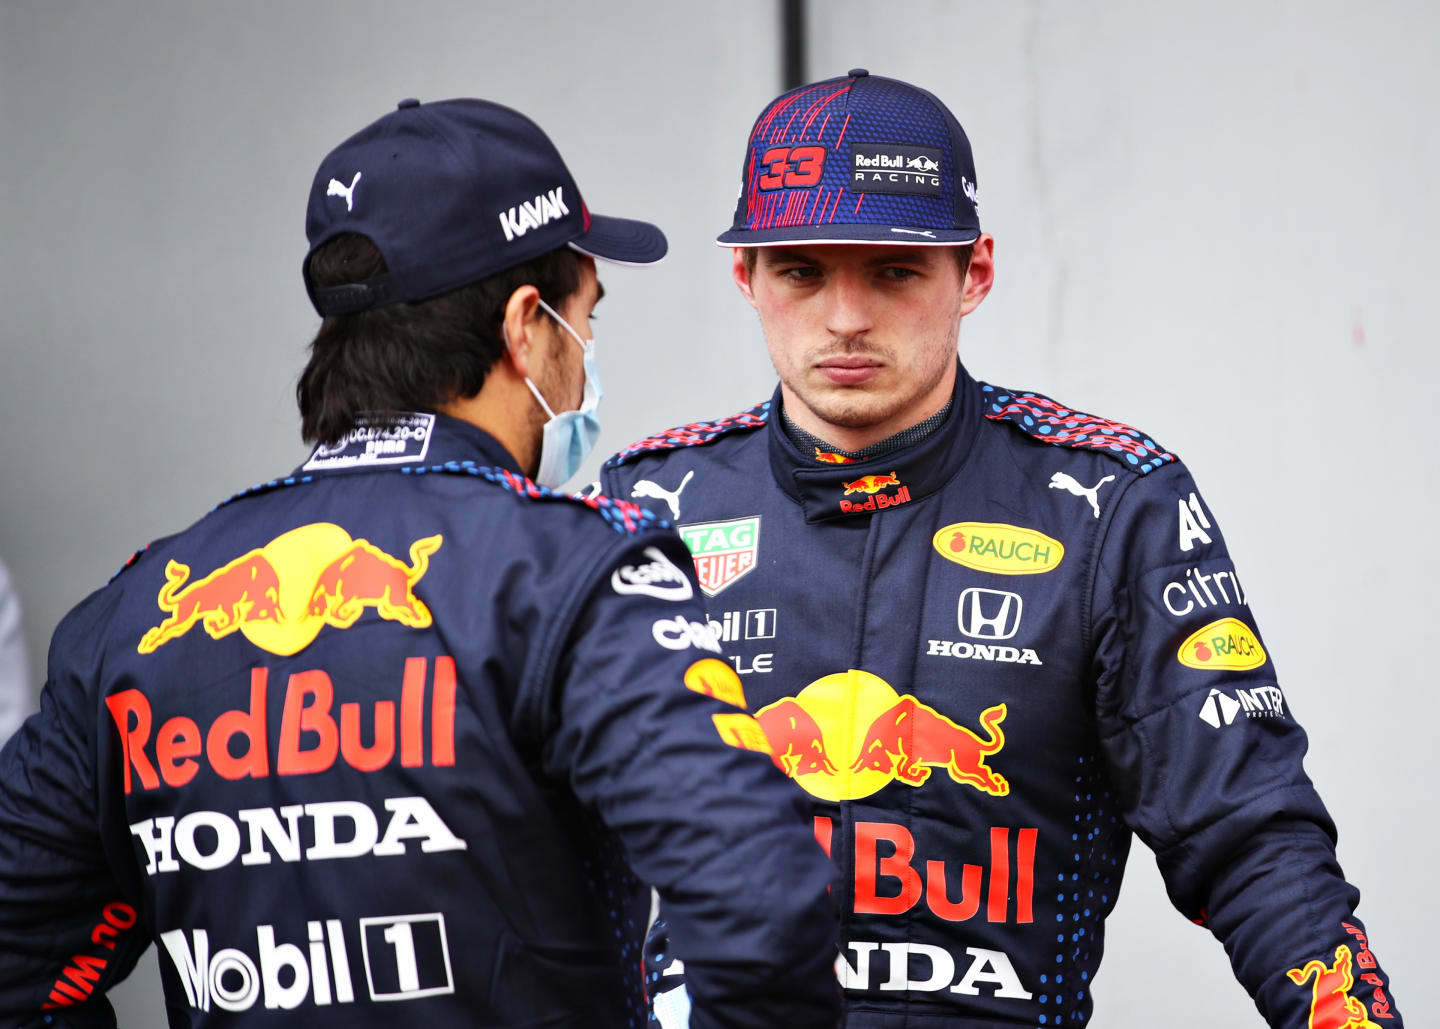 IMOLA, ITALY - APRIL 17: Second place qualifier Sergio Perez of Mexico and Red Bull Racing and third place qualifier Max Verstappen of Netherlands and Red Bull Racing talk in parc ferme during qualifying ahead of the F1 Grand Prix of Emilia Romagna at Autodromo Enzo e Dino Ferrari on April 17, 2021 in Imola, Italy. (Photo by Mark Thompson/Getty Images)